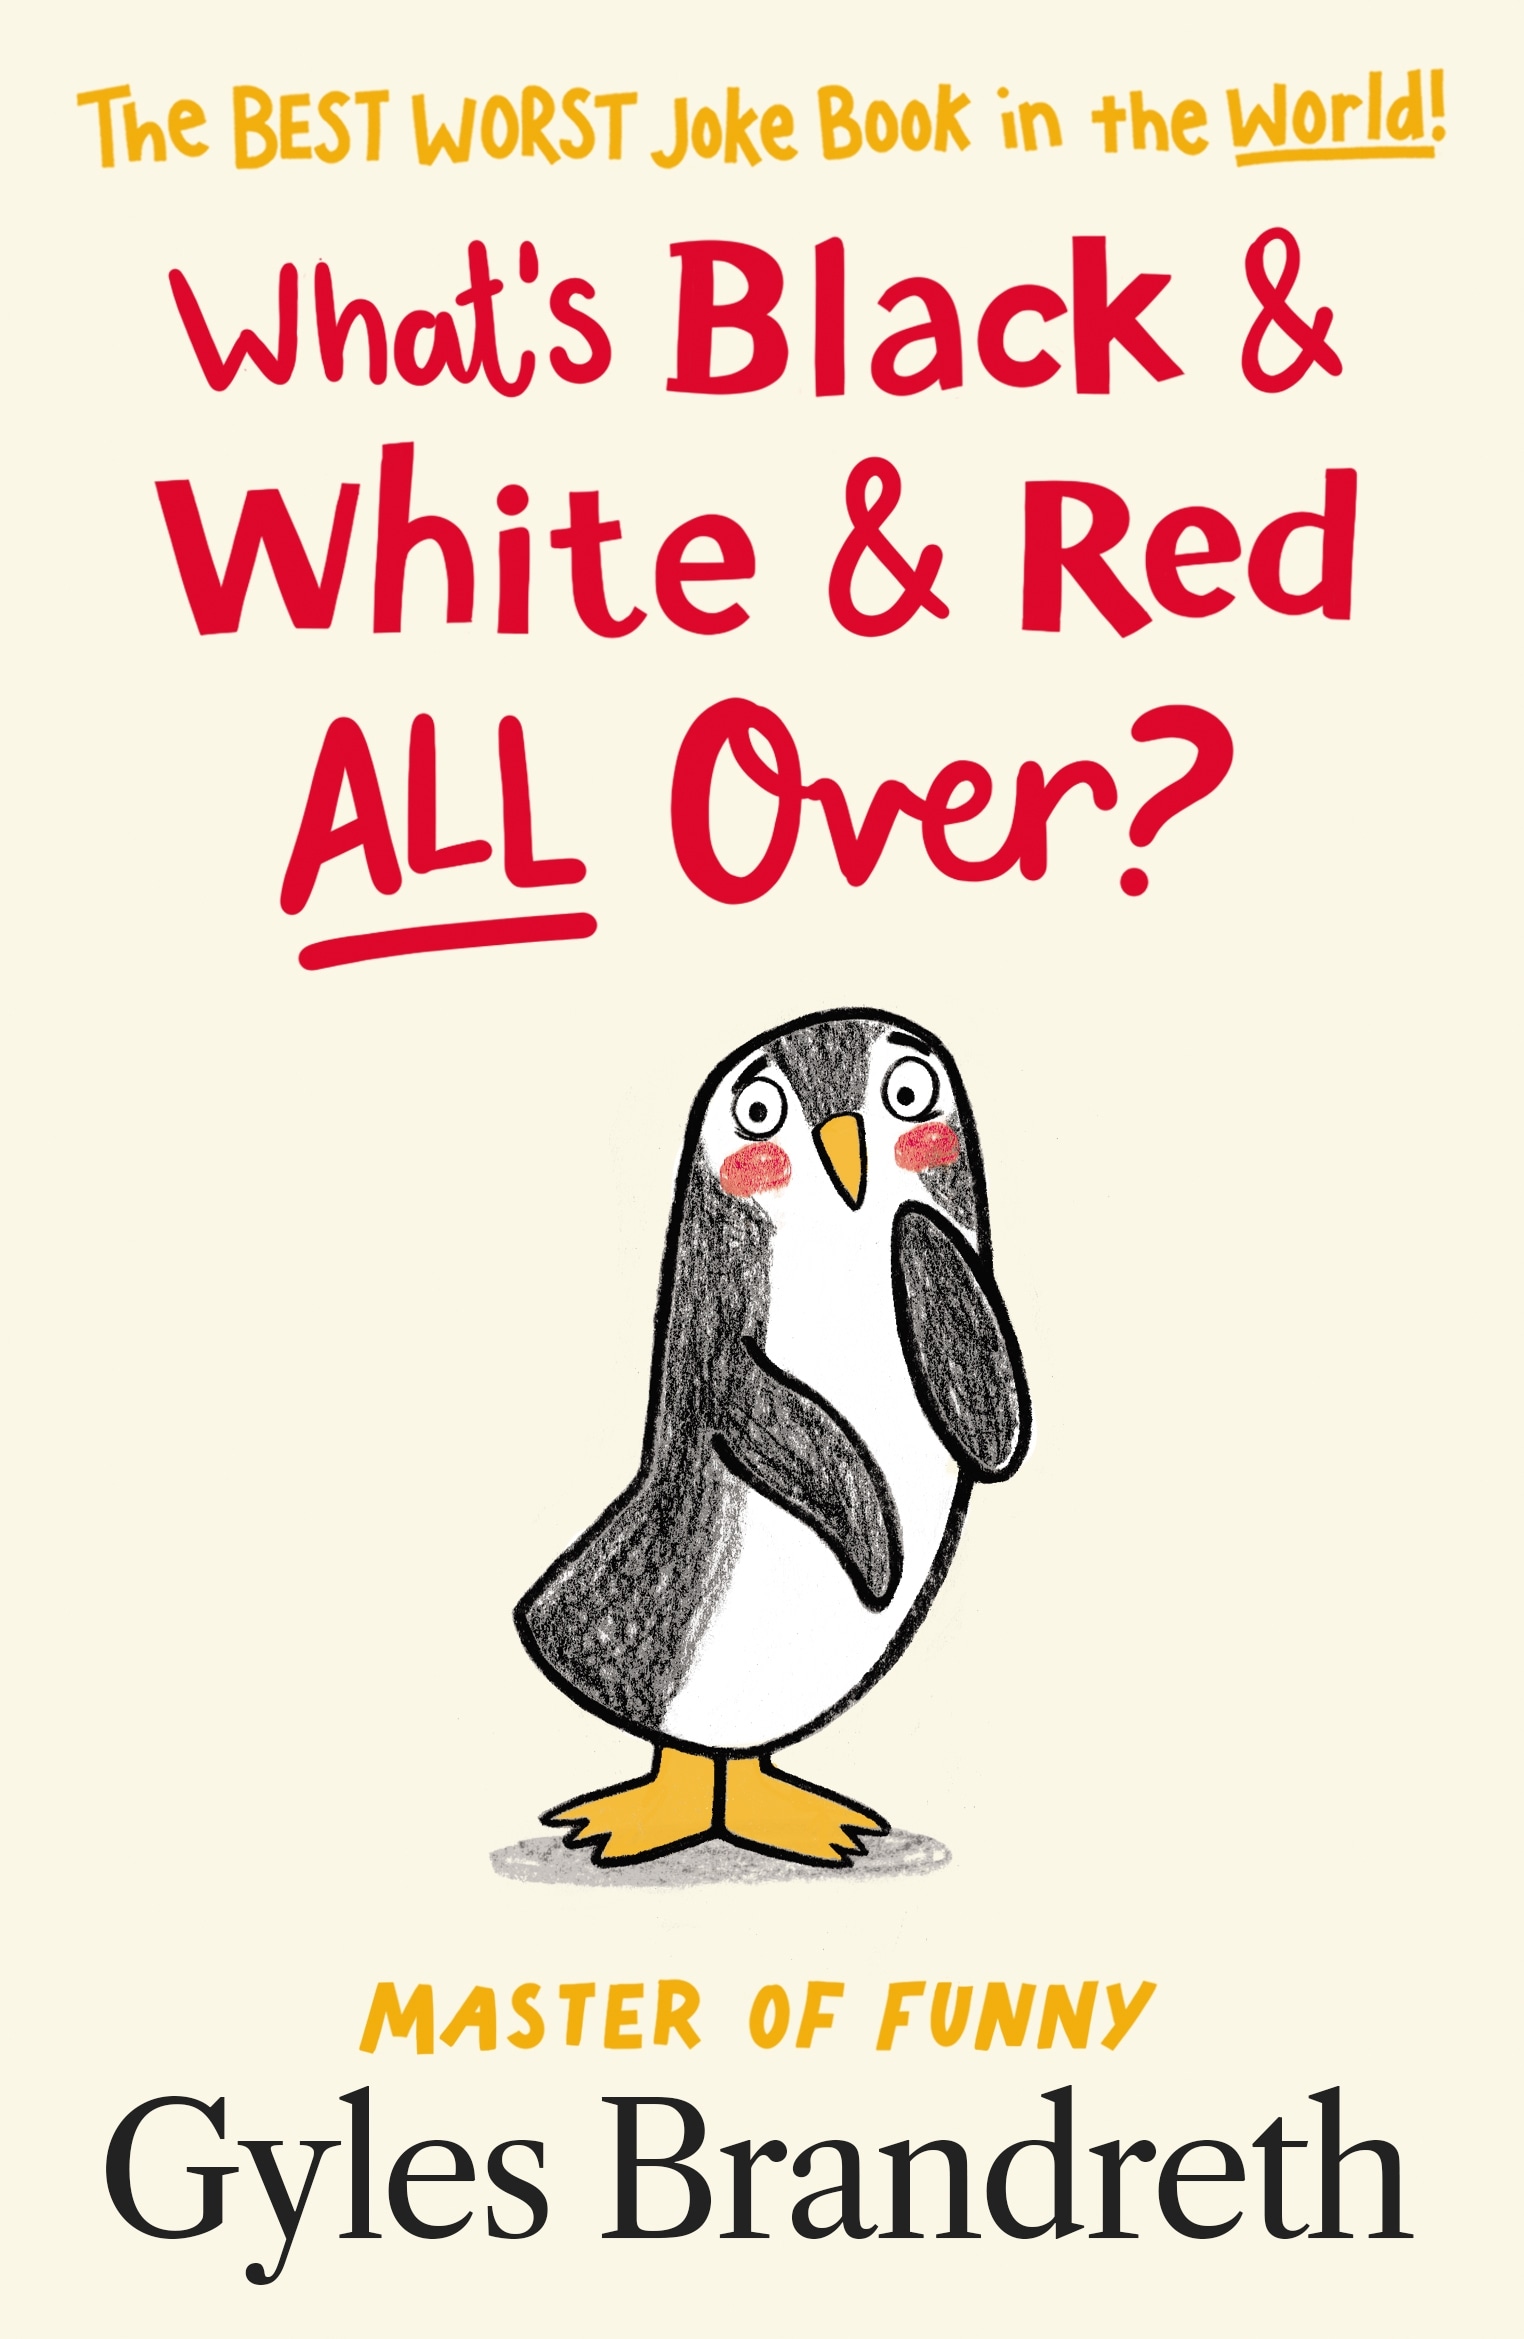 Book “What’s Black and White and Red All Over?” by Gyles Brandreth — August 20, 2020